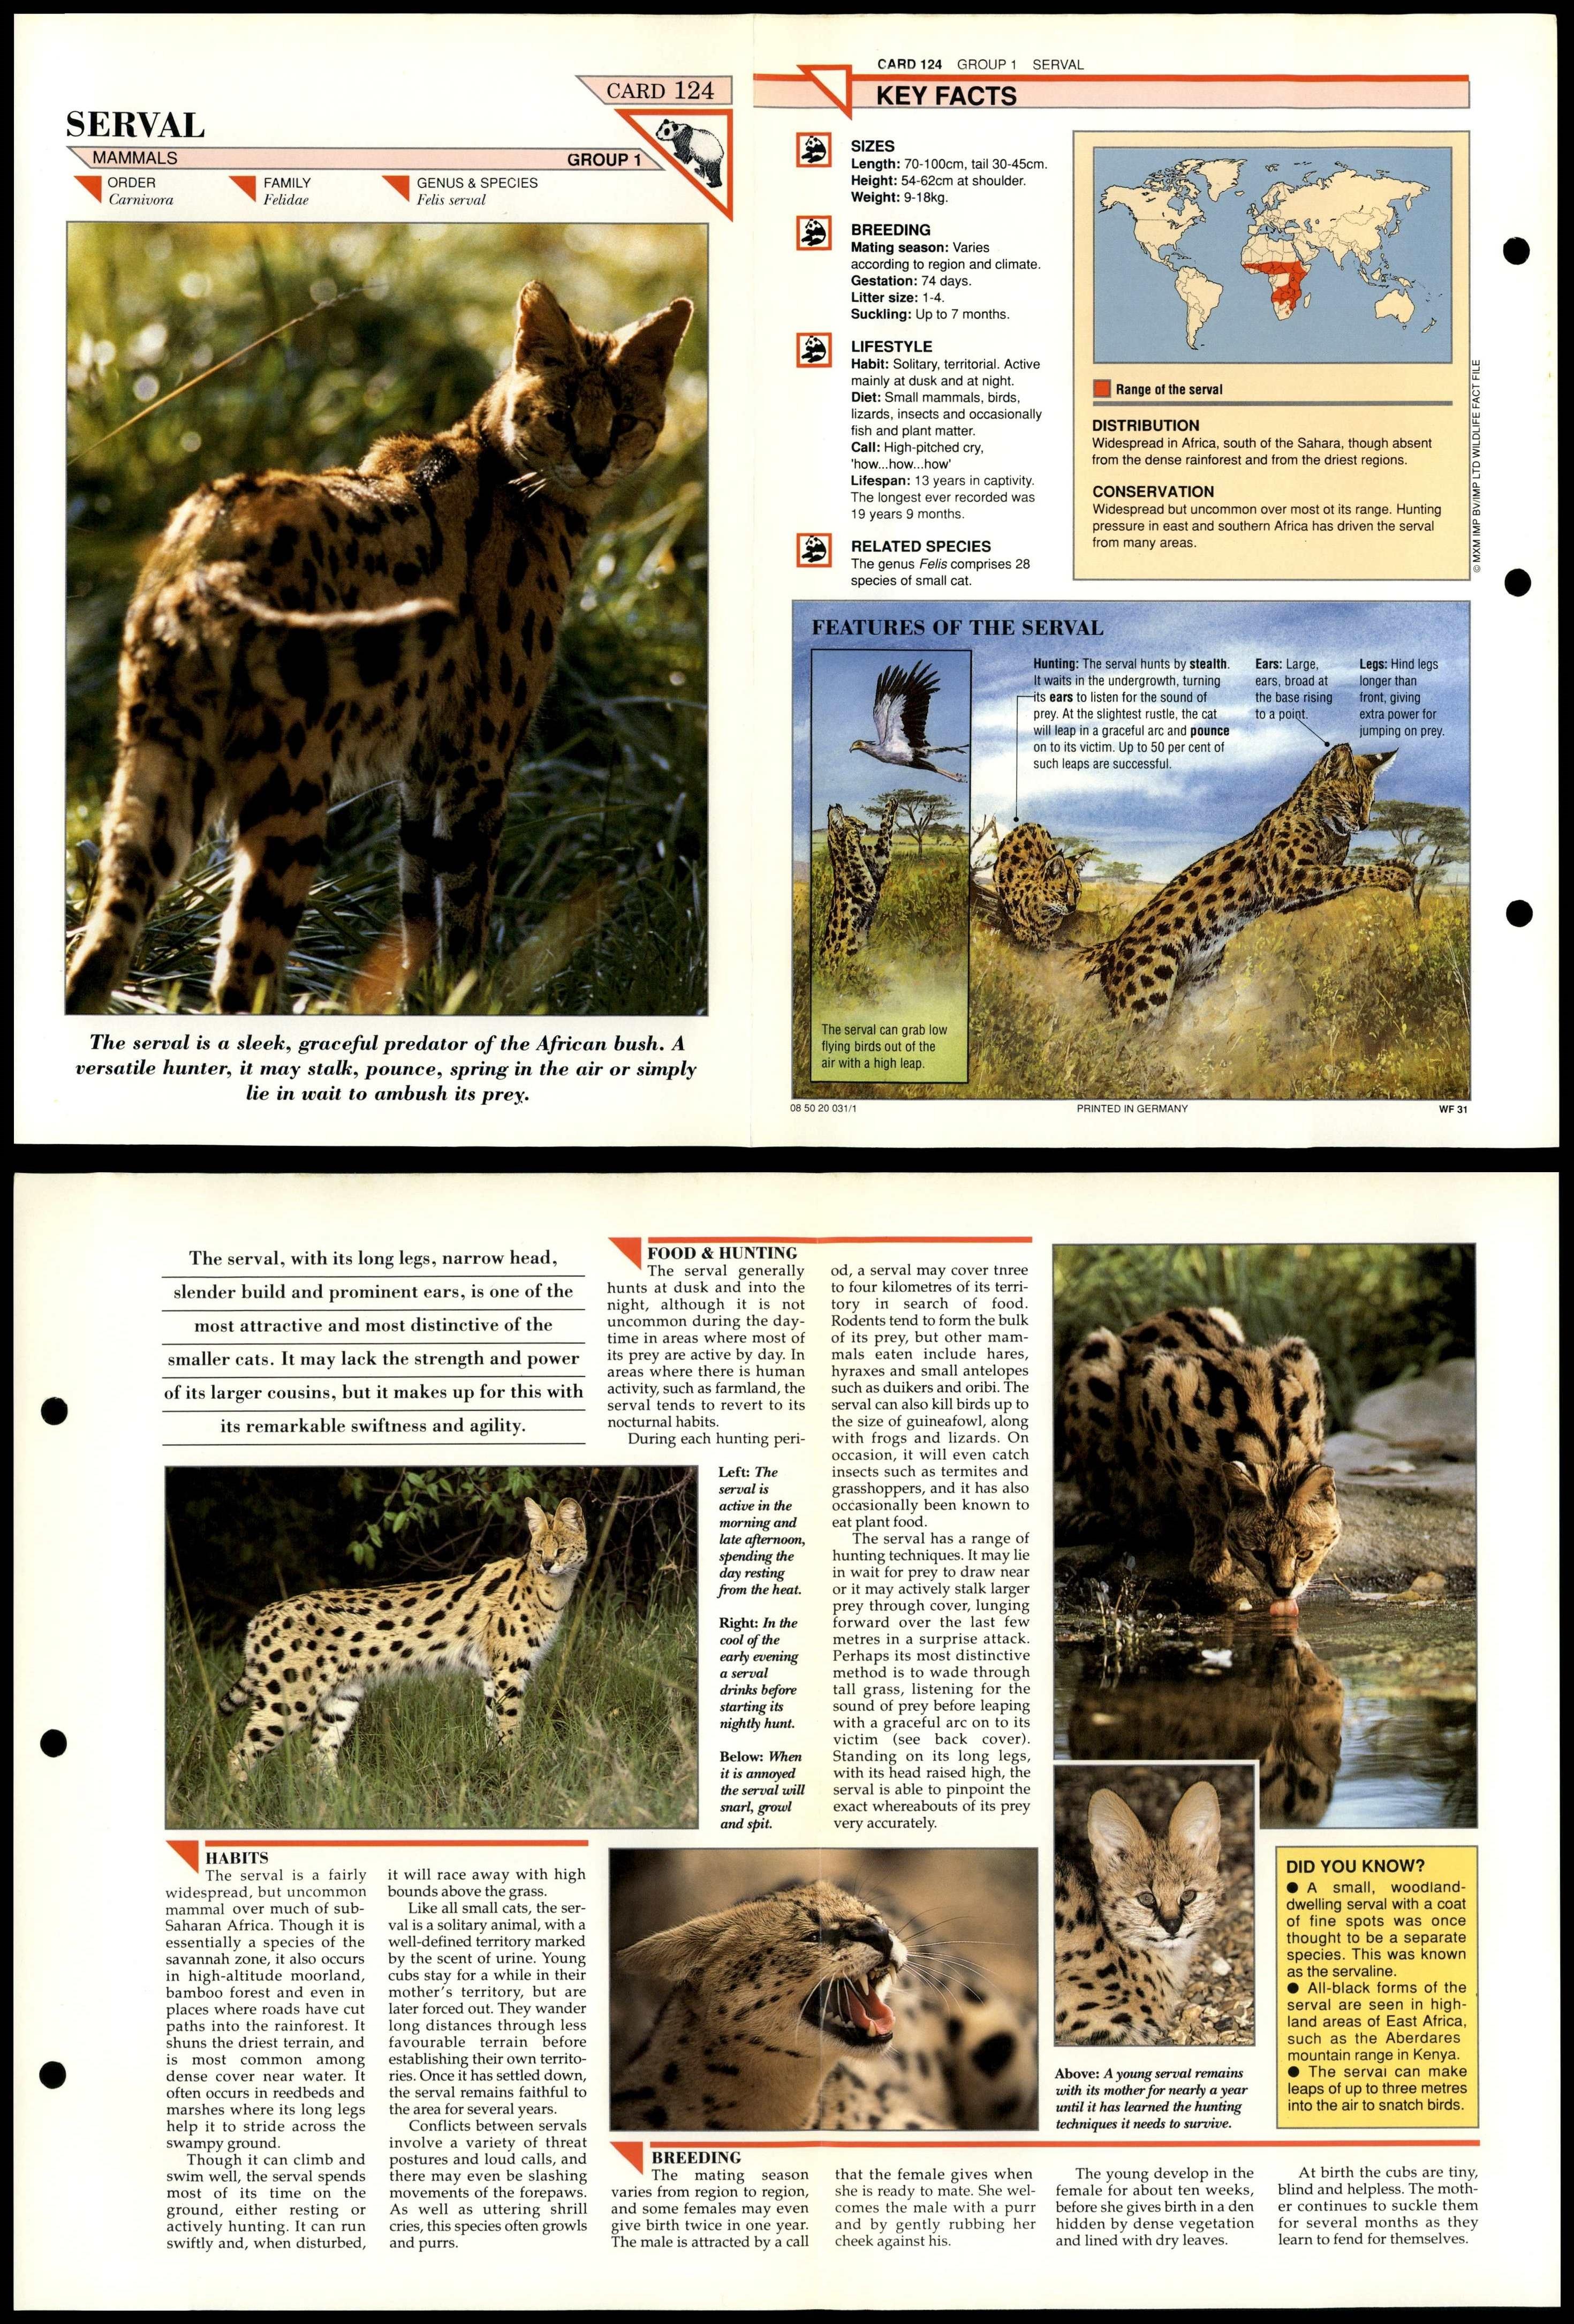 Serval #124 Mammals Wildlife Fact File Fold-Out Card